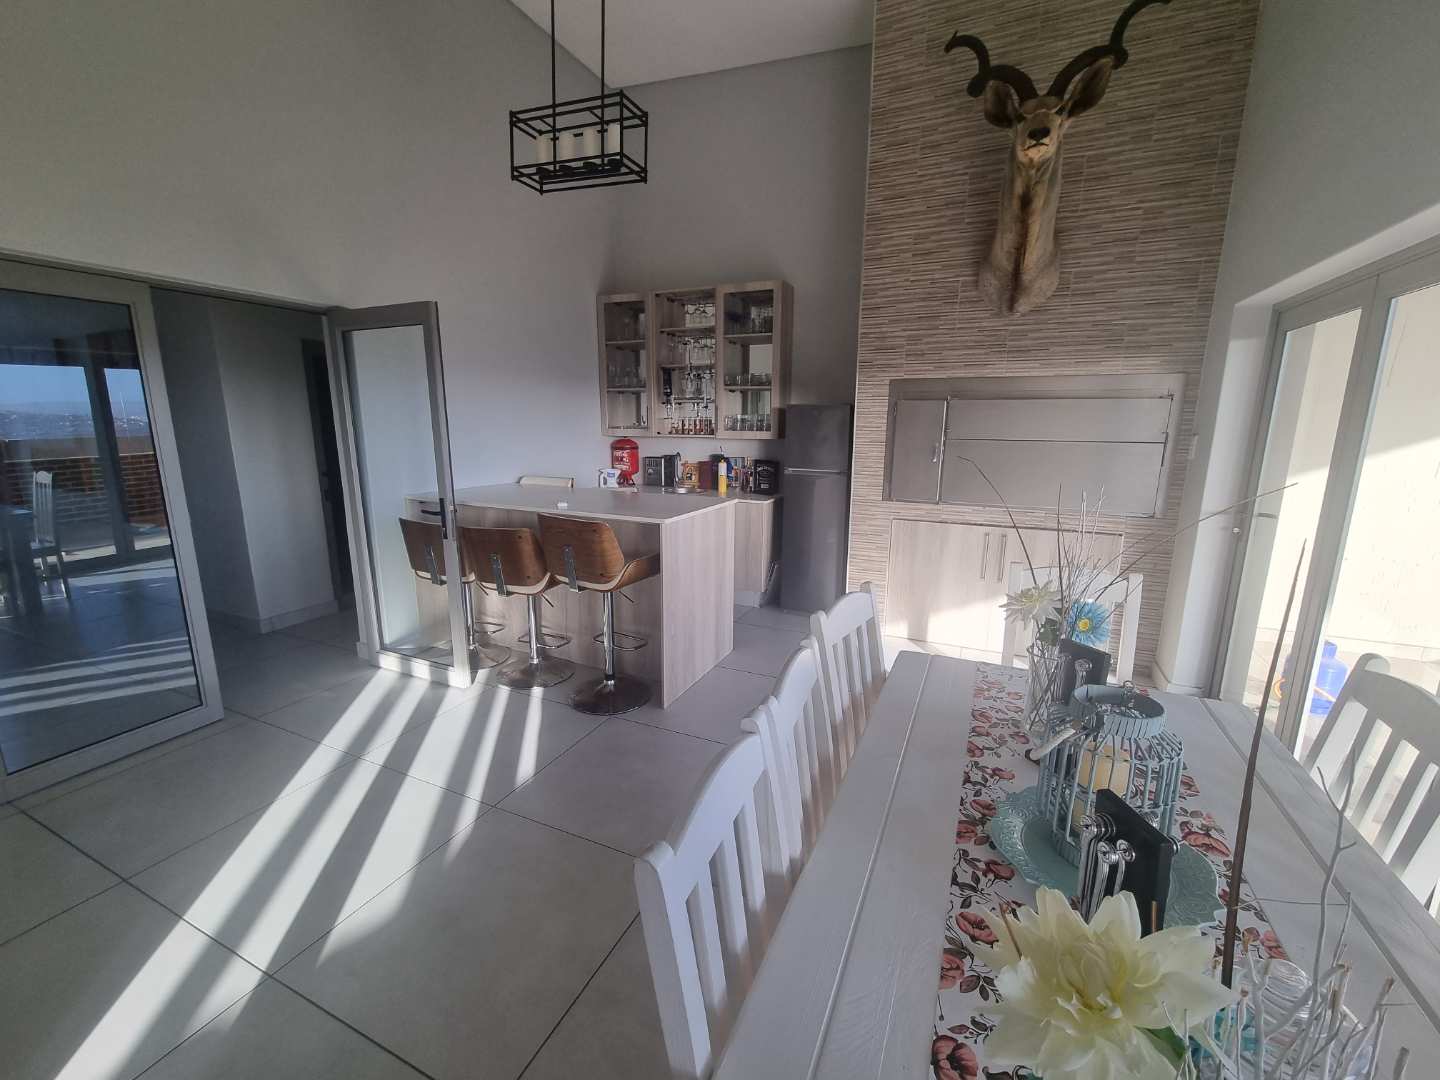 4 Bedroom Property for Sale in Monte Christo Western Cape